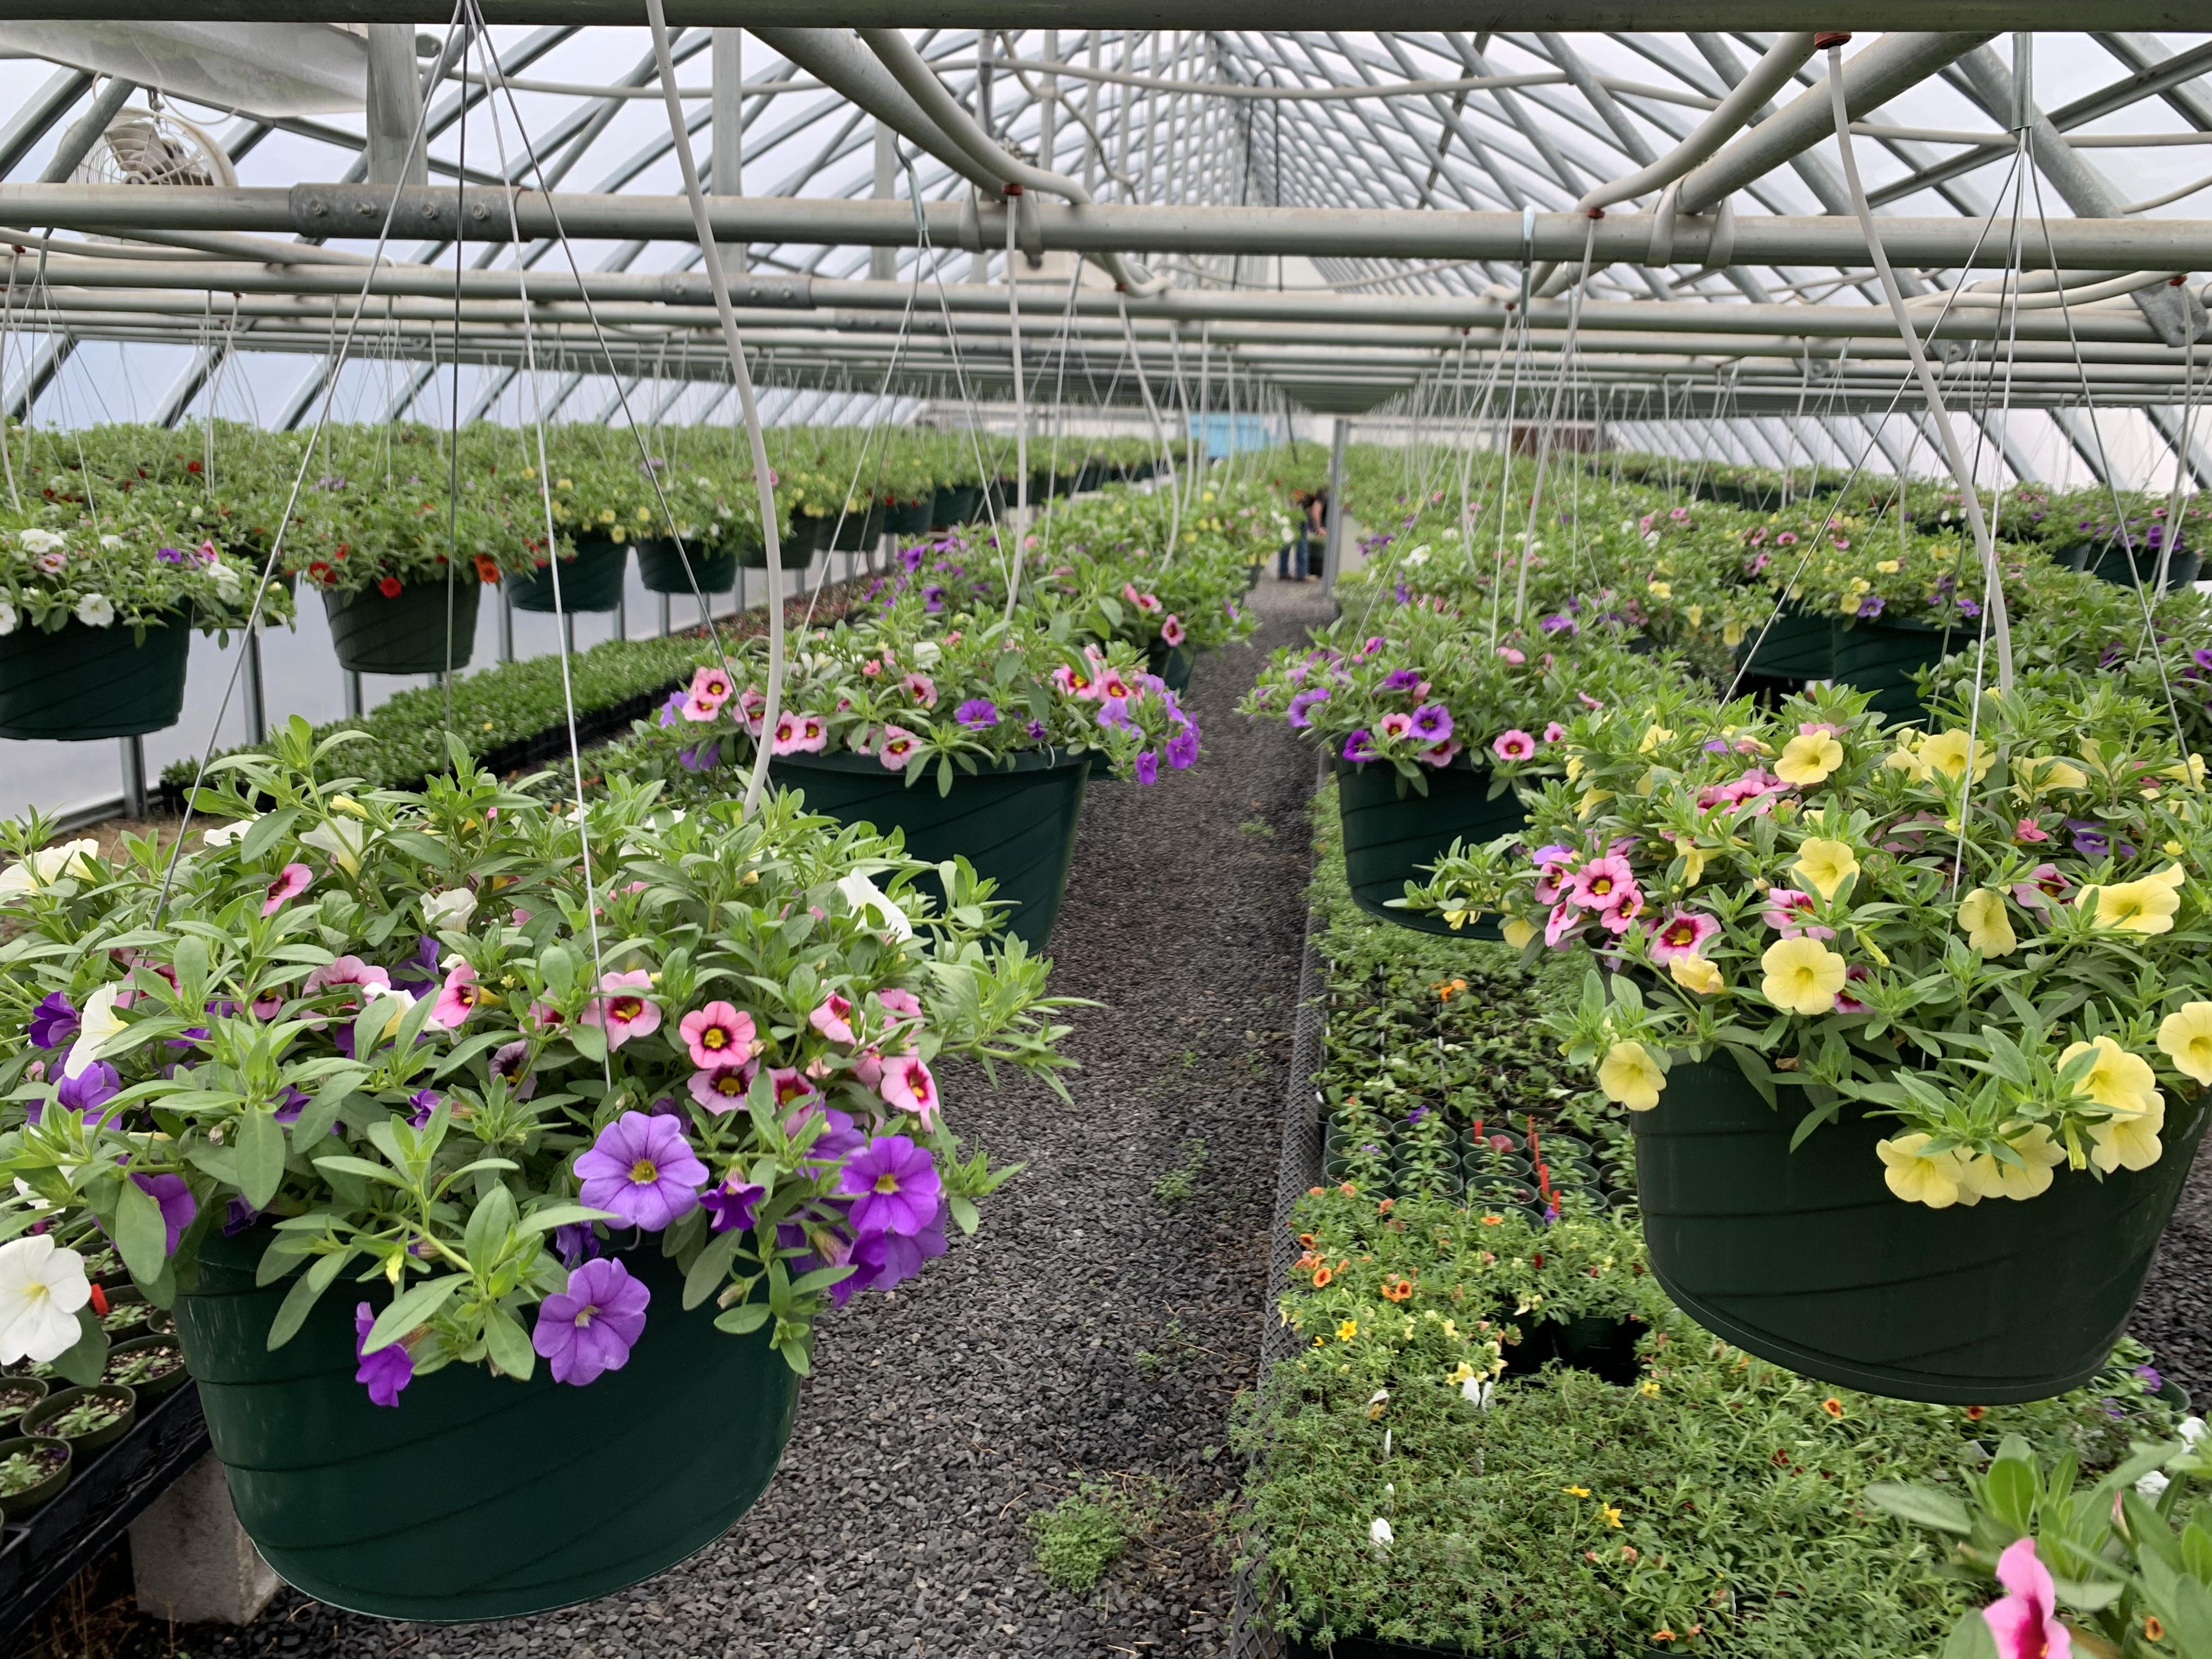 rows of hanging flower baskets